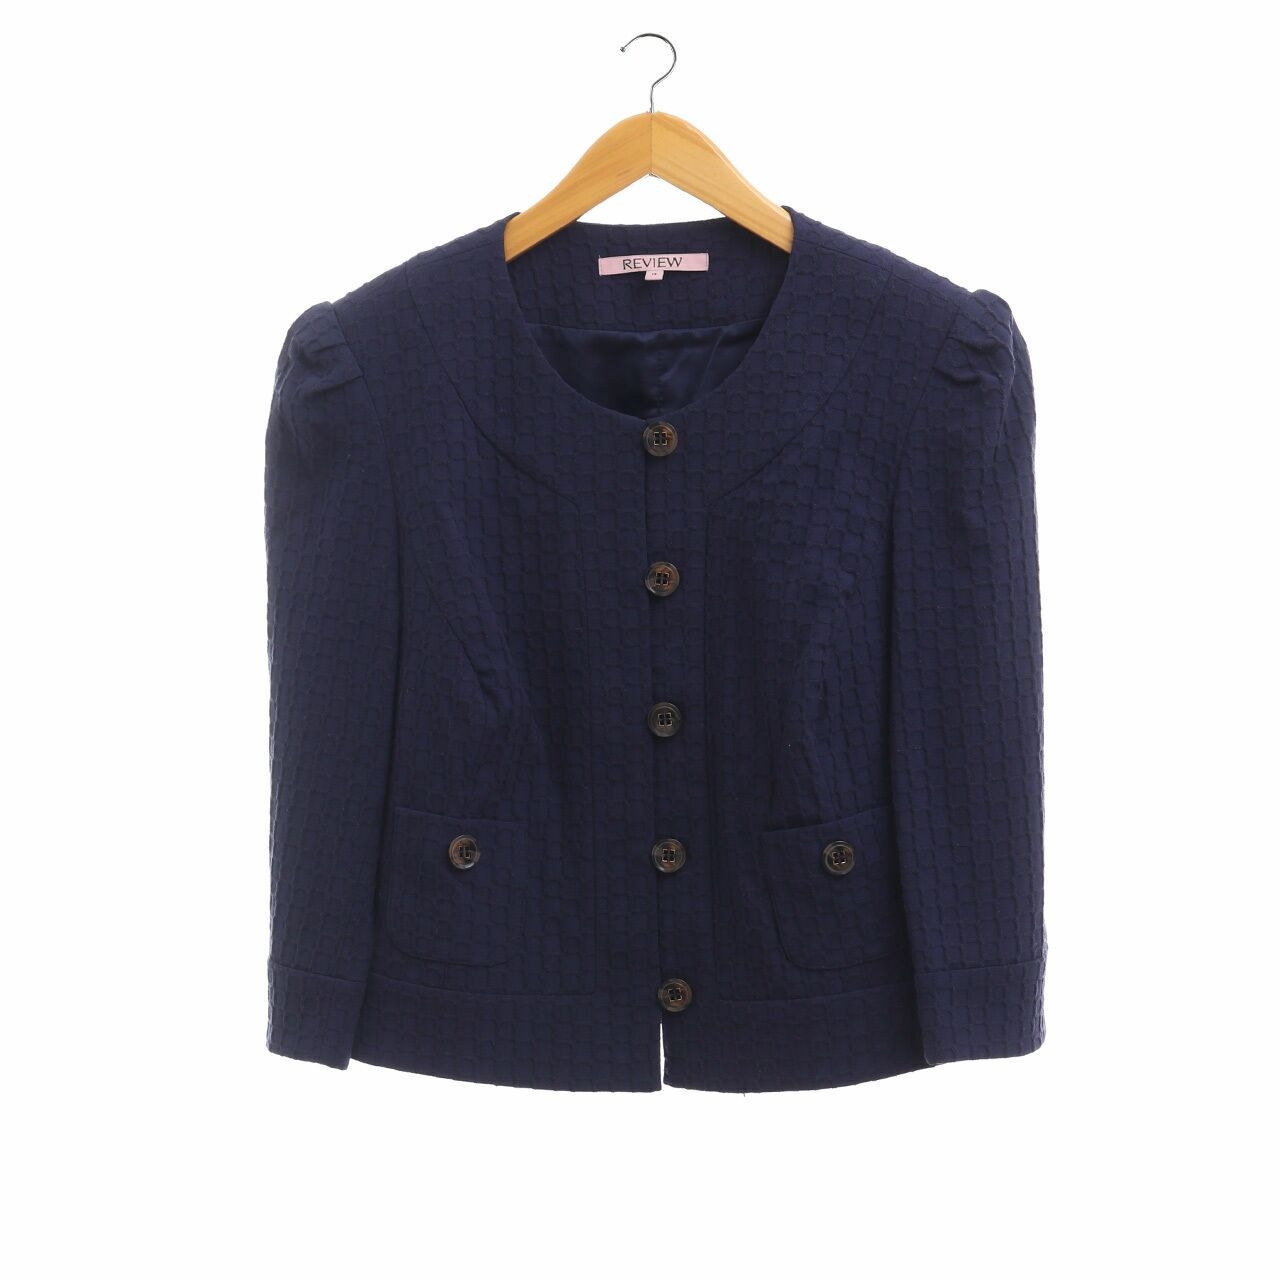 Review Blue Cardigan